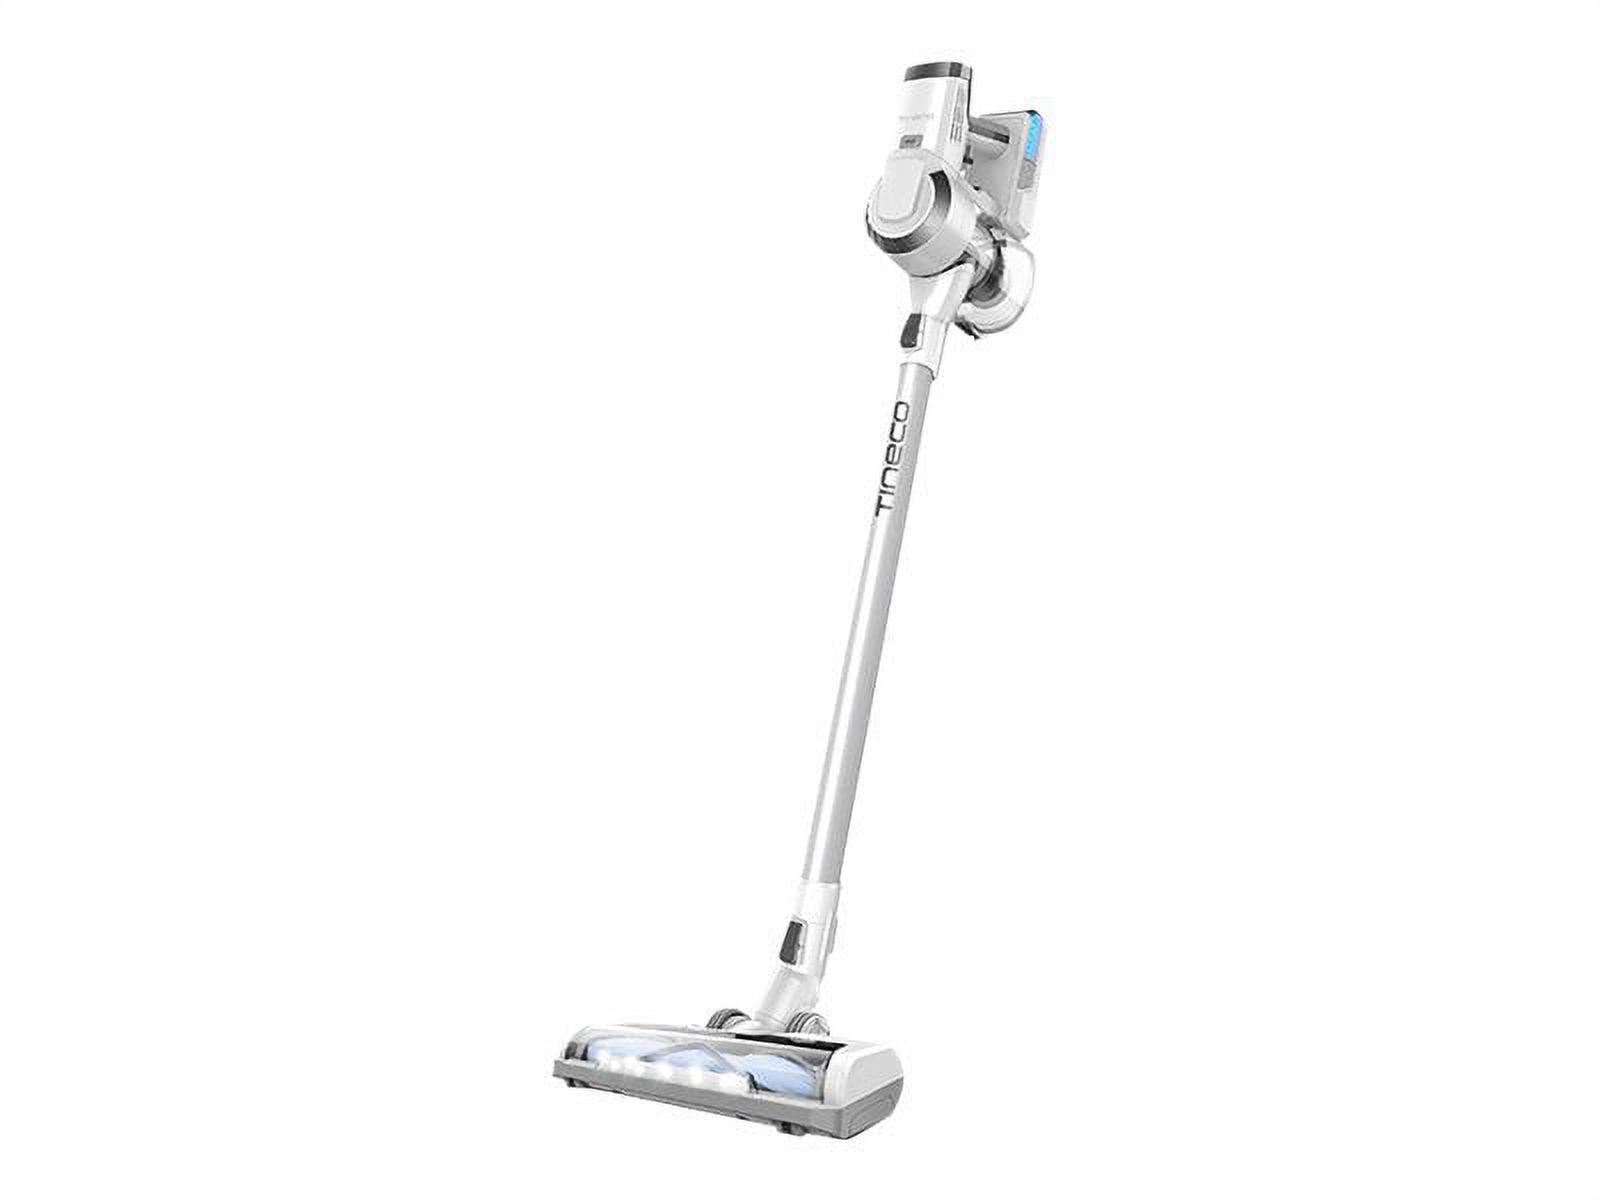 Tineco A10 Spartan Lightweight Cordless Stick Vacuum Cleaner - image 2 of 8